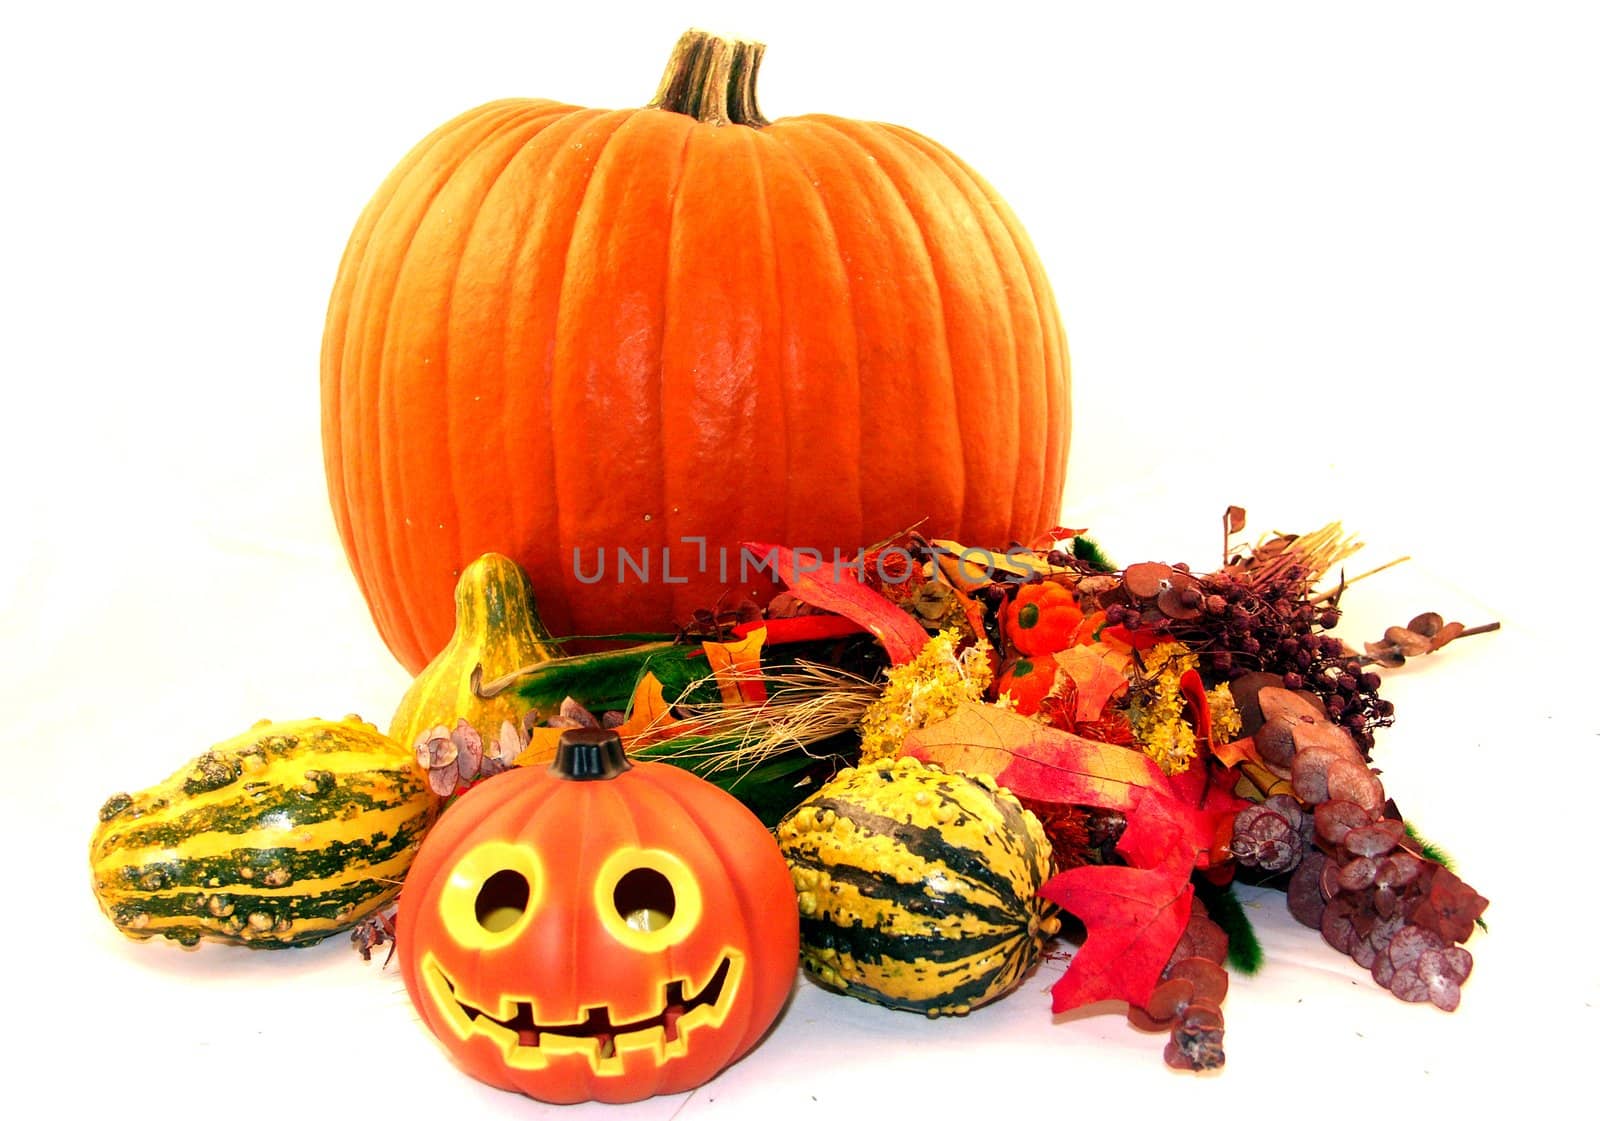 Fall holiday centerpiece with a carved and uncarved pumpkin